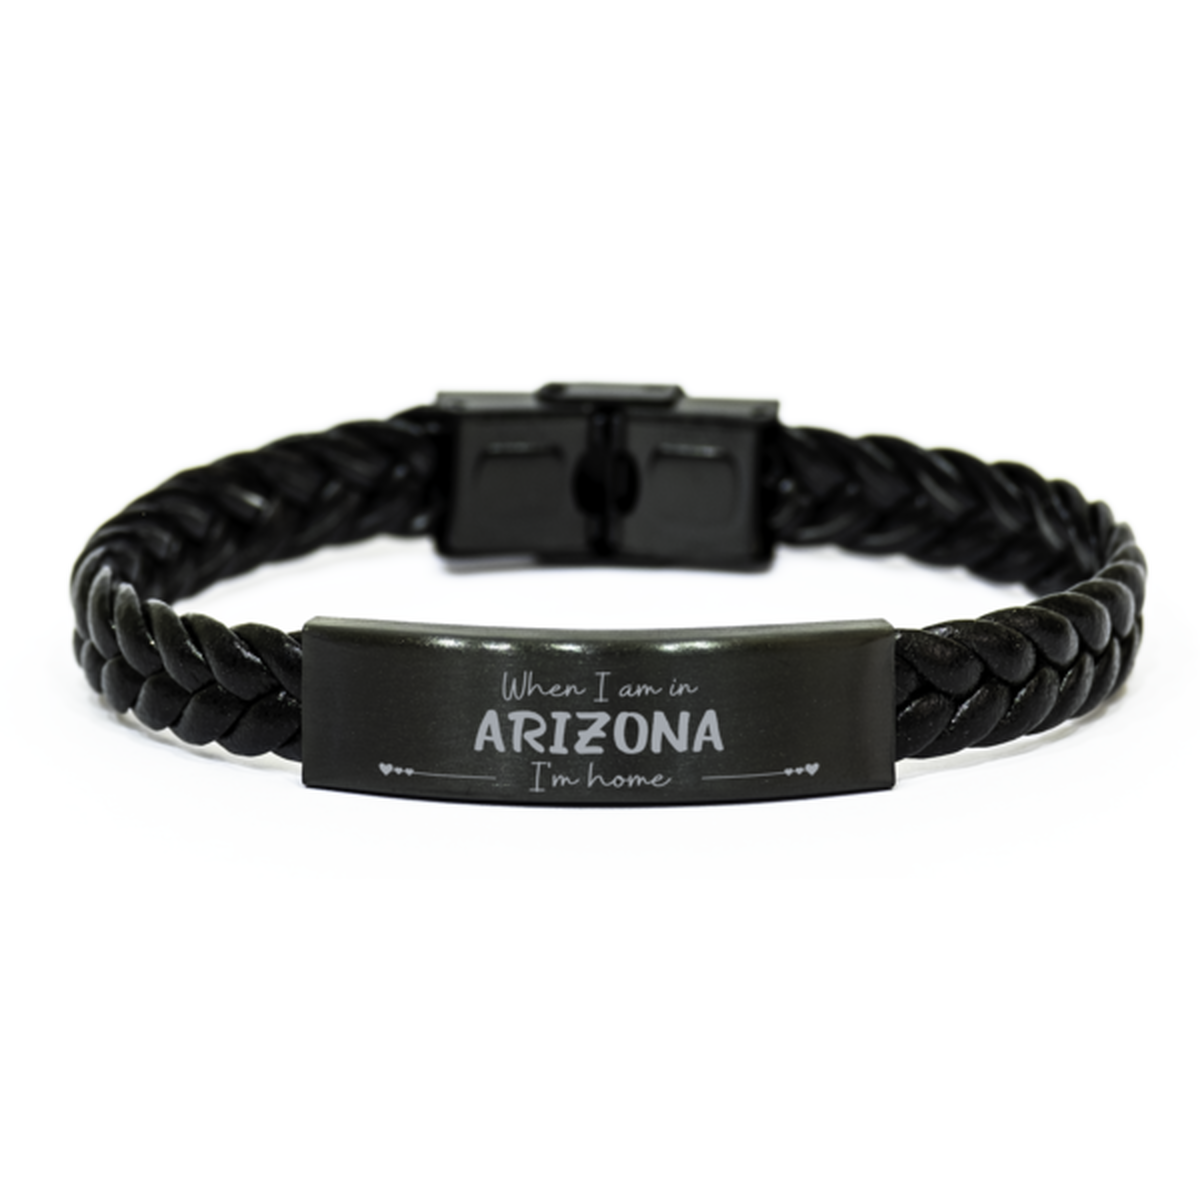 When I am in Arizona I'm home Braided Leather Bracelet, Cheap Gifts For Arizona, State Arizona Birthday Gifts for Friends Coworker